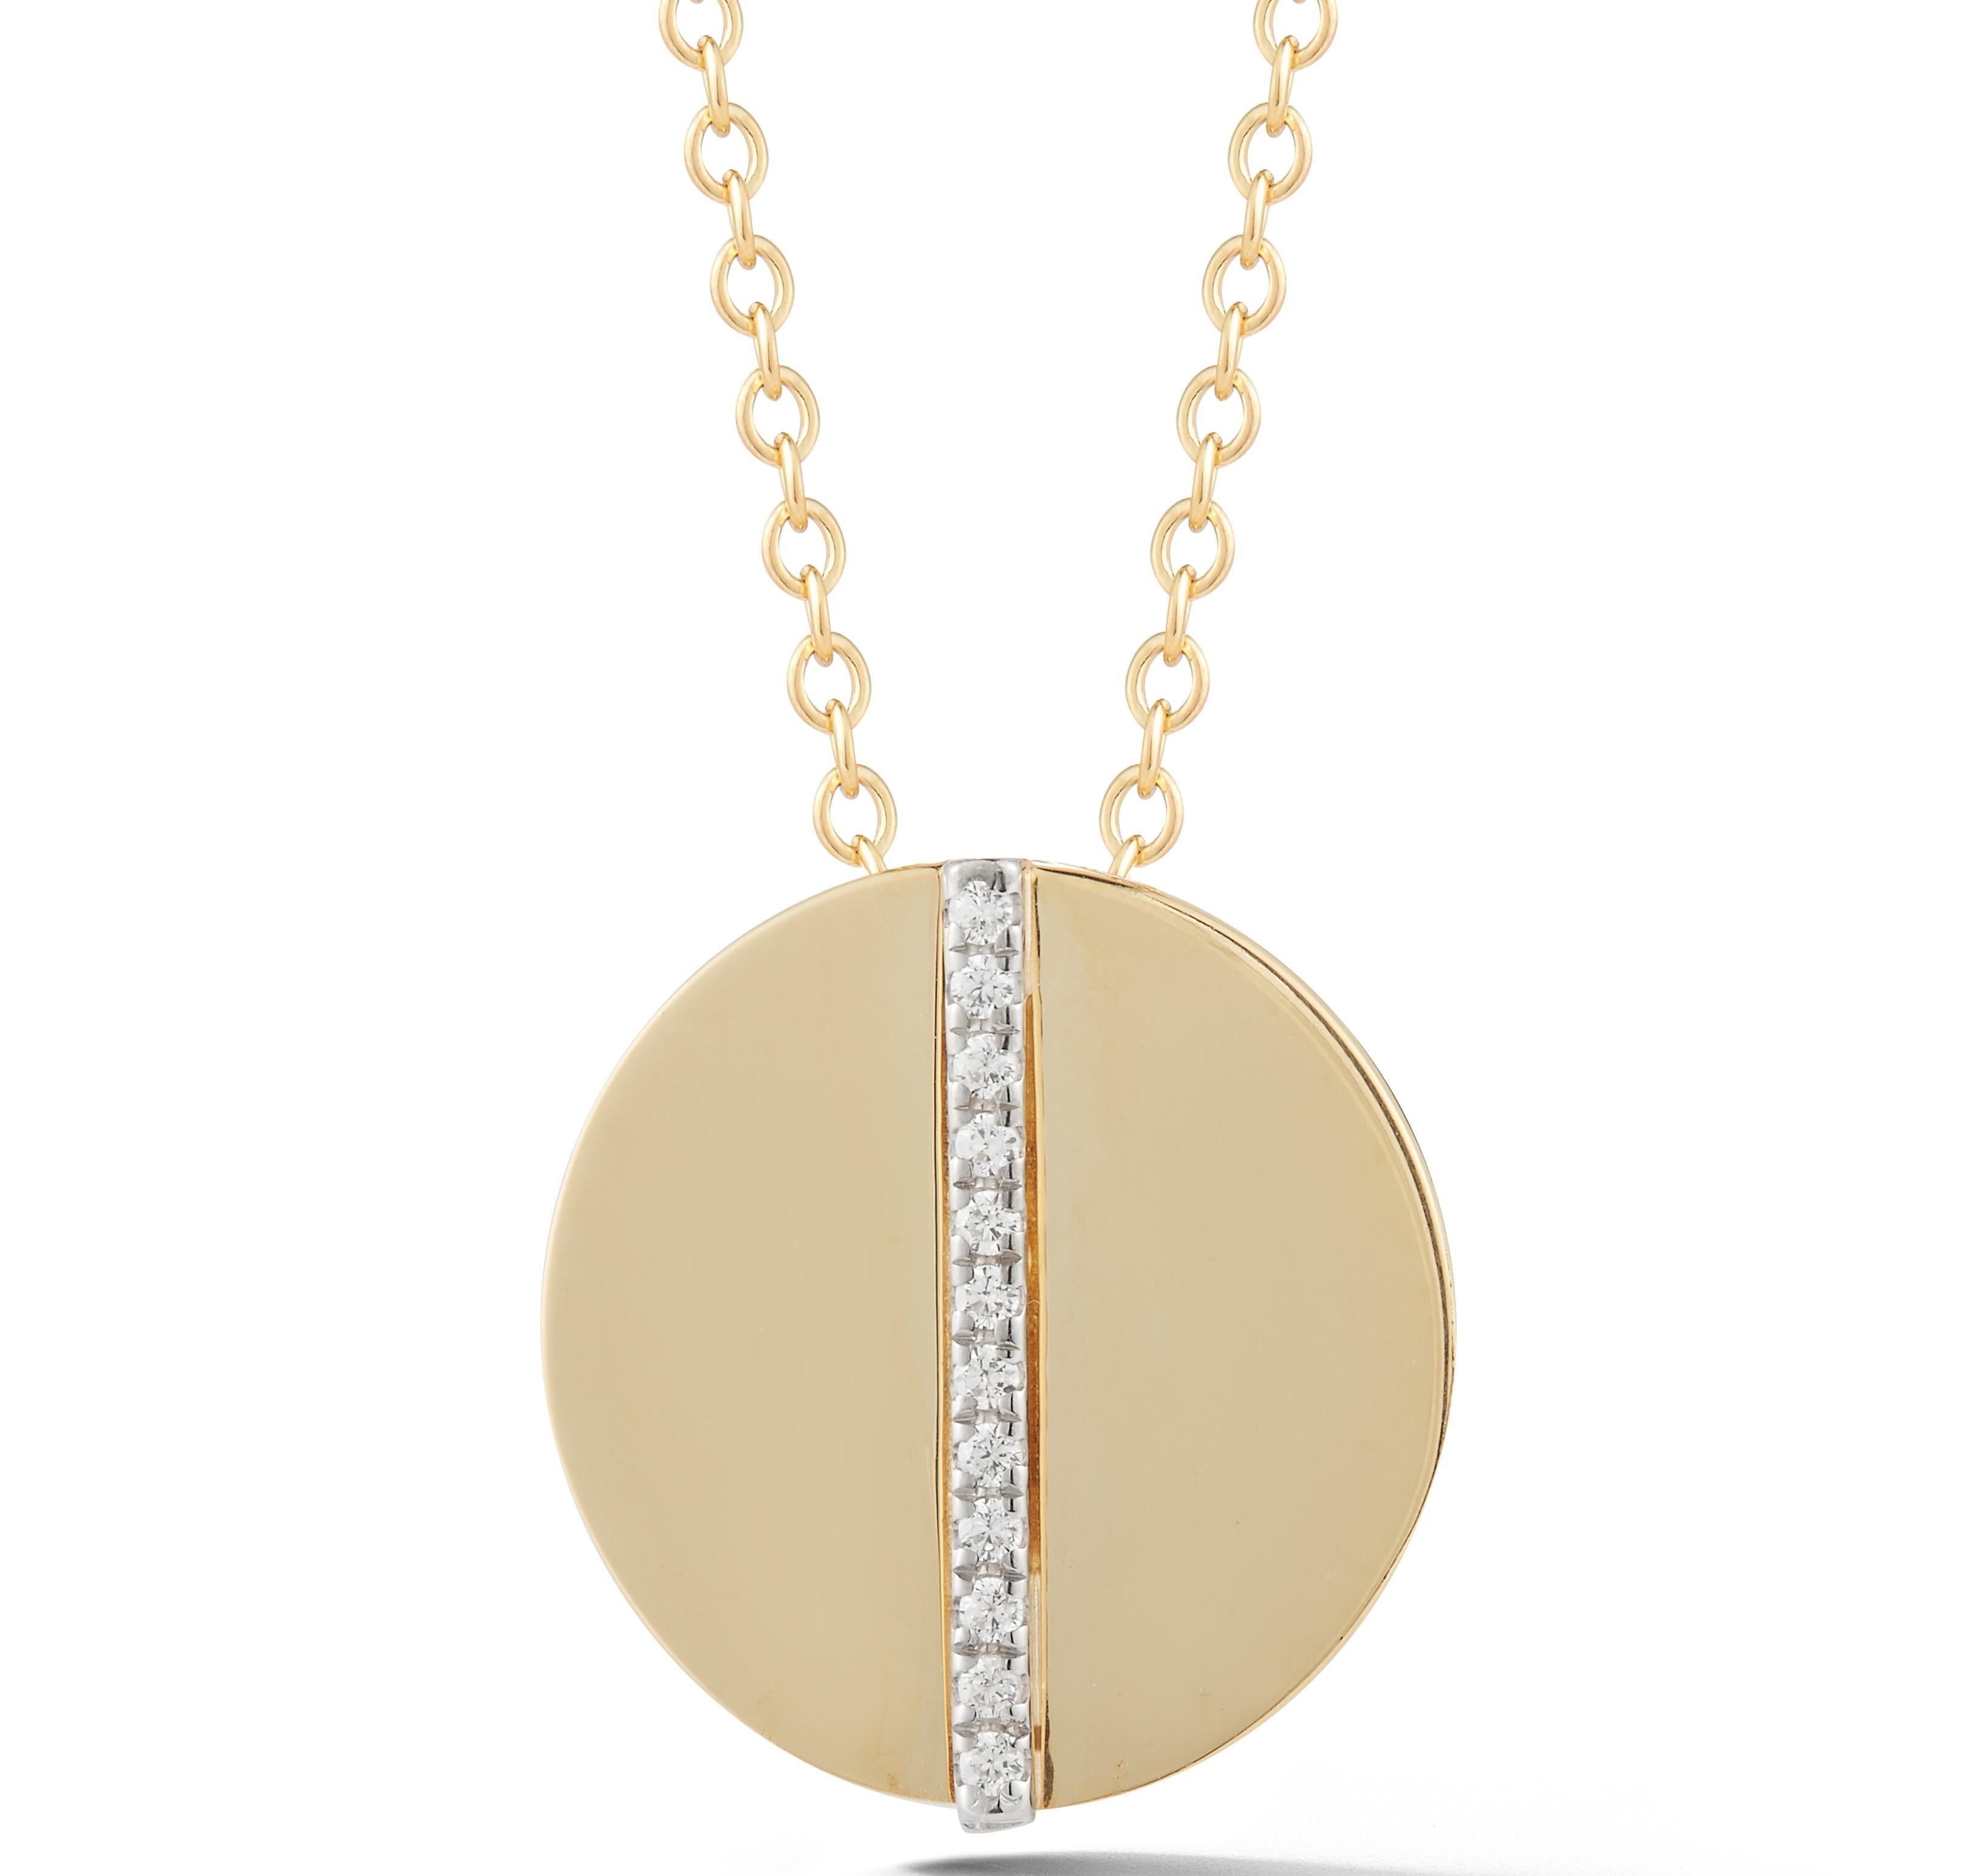 14 Karat Yellow Gold Hand-Crafted Polish-Finished 20mm Round-Shaped Pendant, Accented with 0.07 Carats of Pave Set Diamonds, Sliding on a 16